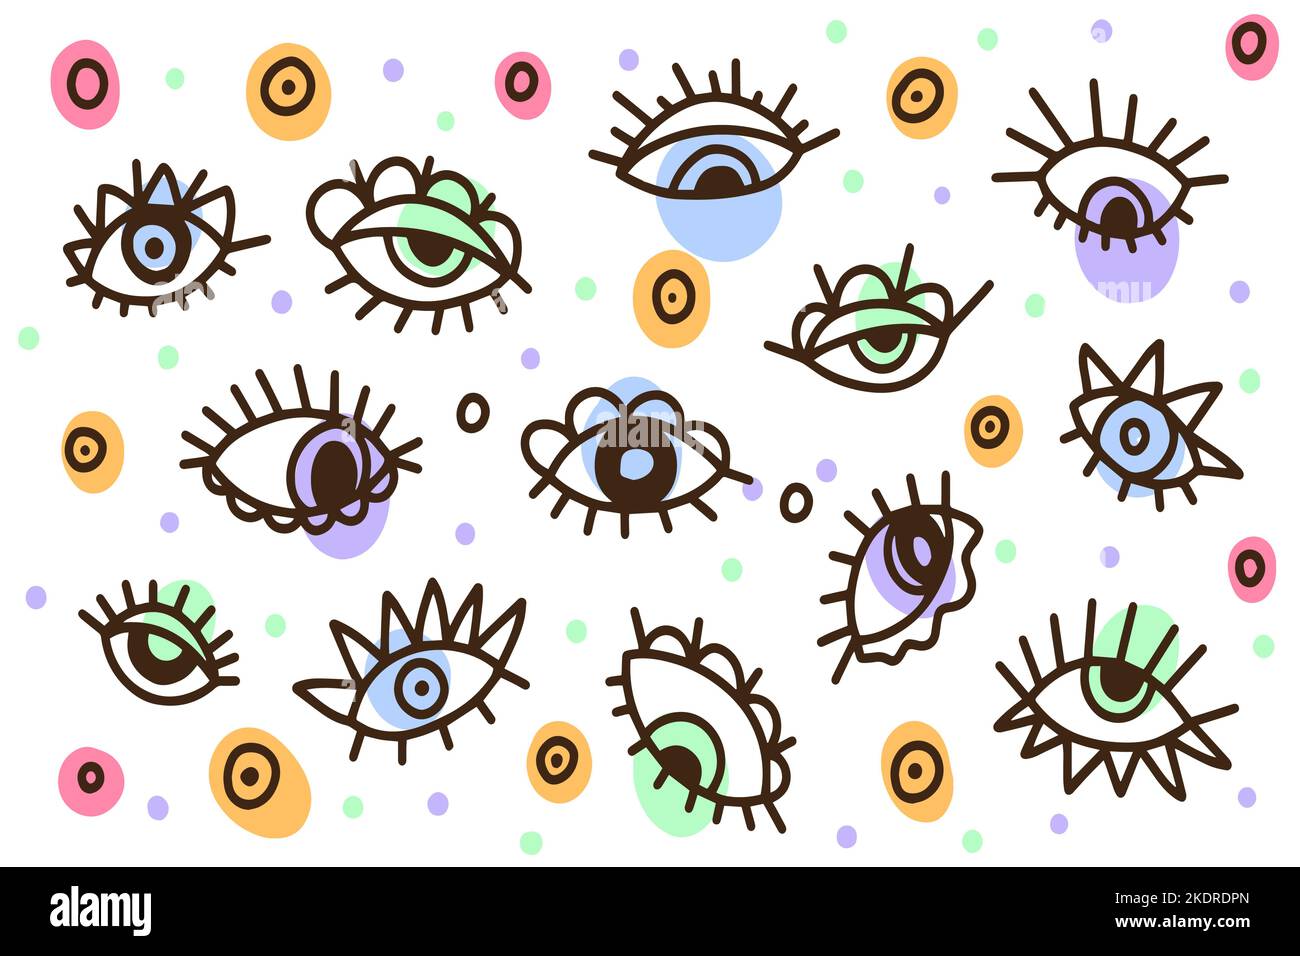 Doodle eyes background, hand drawn set of cute doodles for decoration on a white background Stock Vector